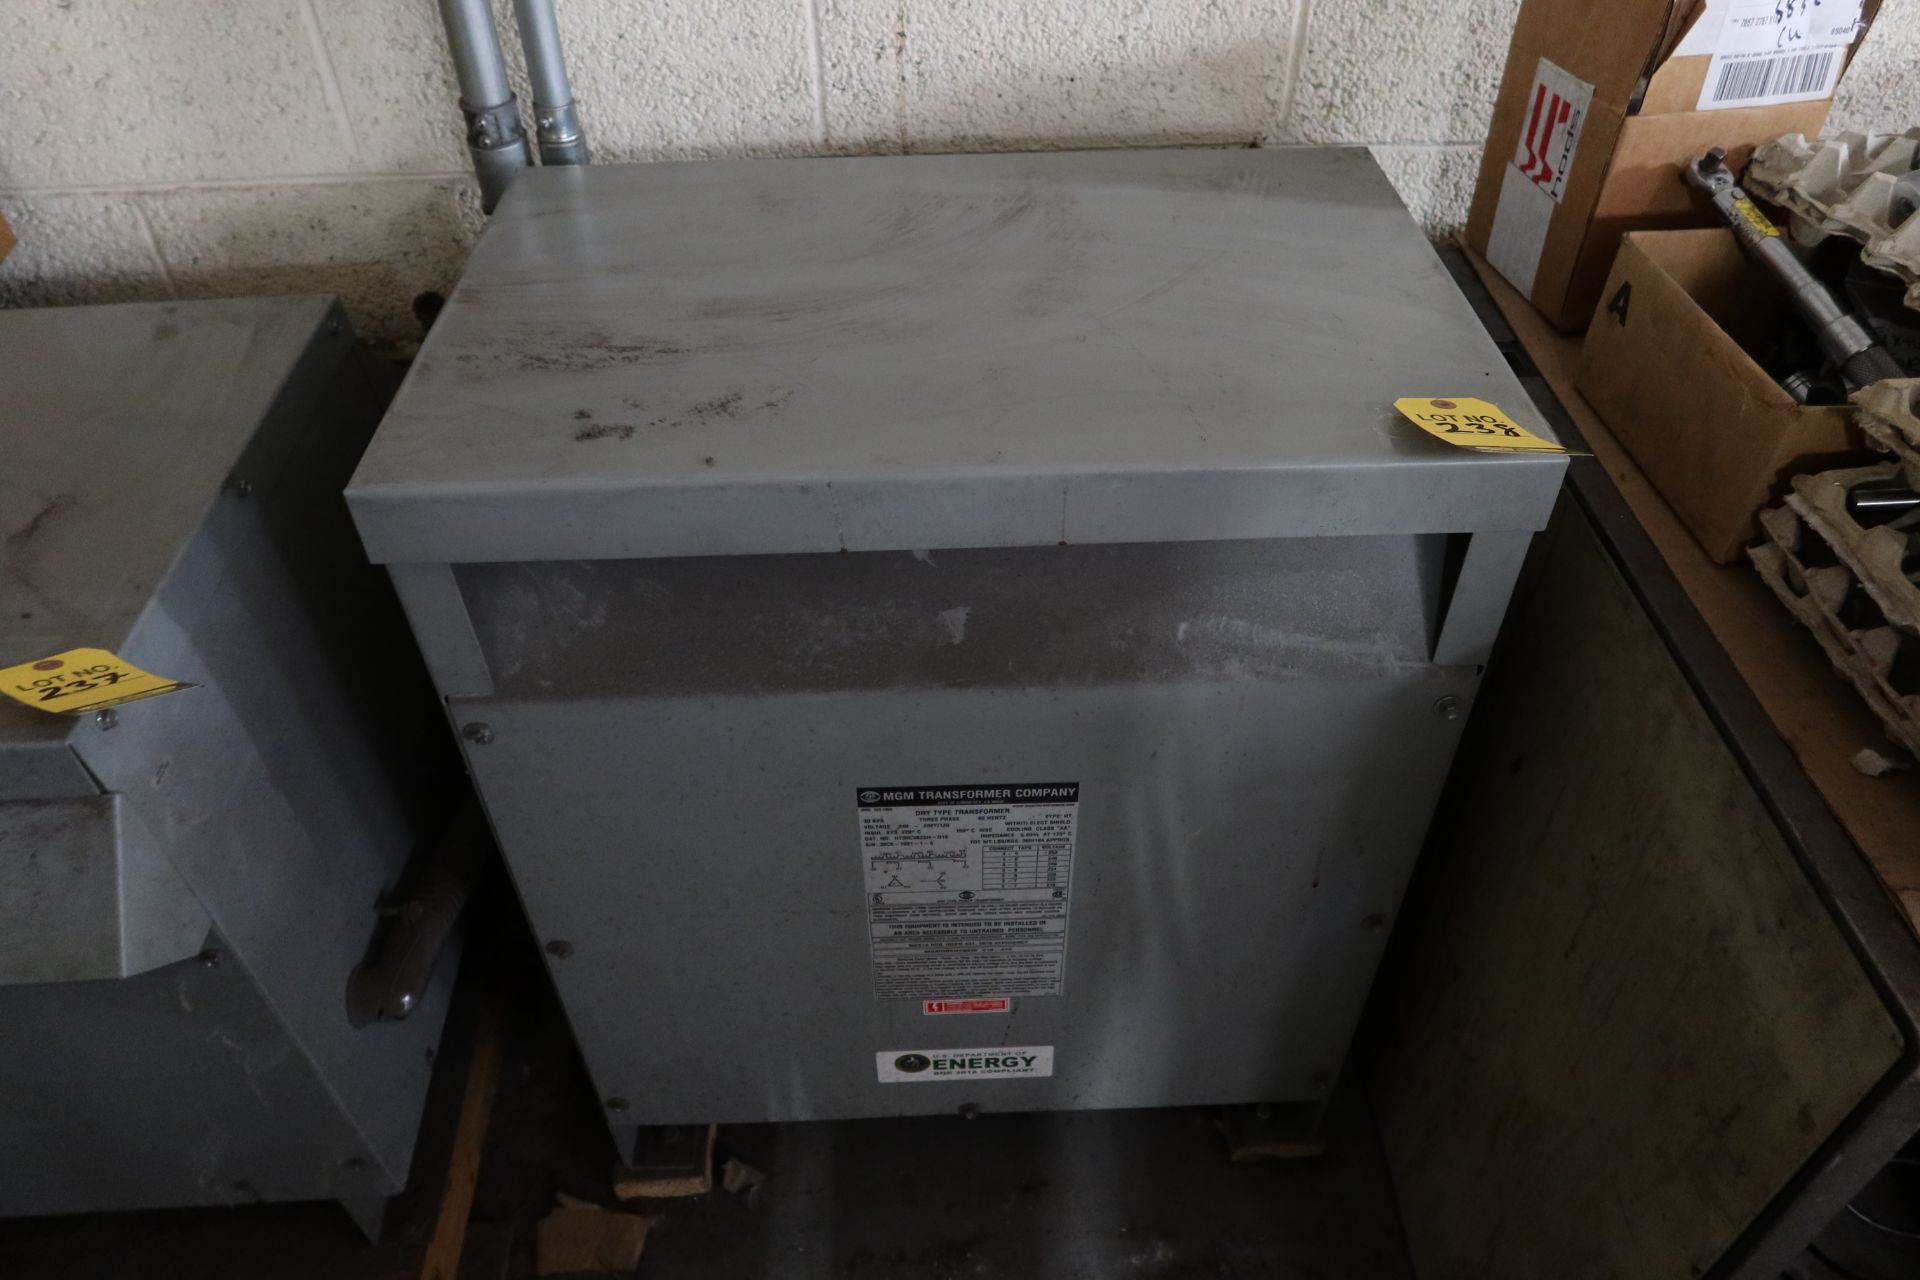 MGM DRYTYPE TRANSFORMER, 30KVA, 3PH, 240 - 208Y/120 (TRANSFORMERS CAN NOT BE DISCONNECTED OR REMOV